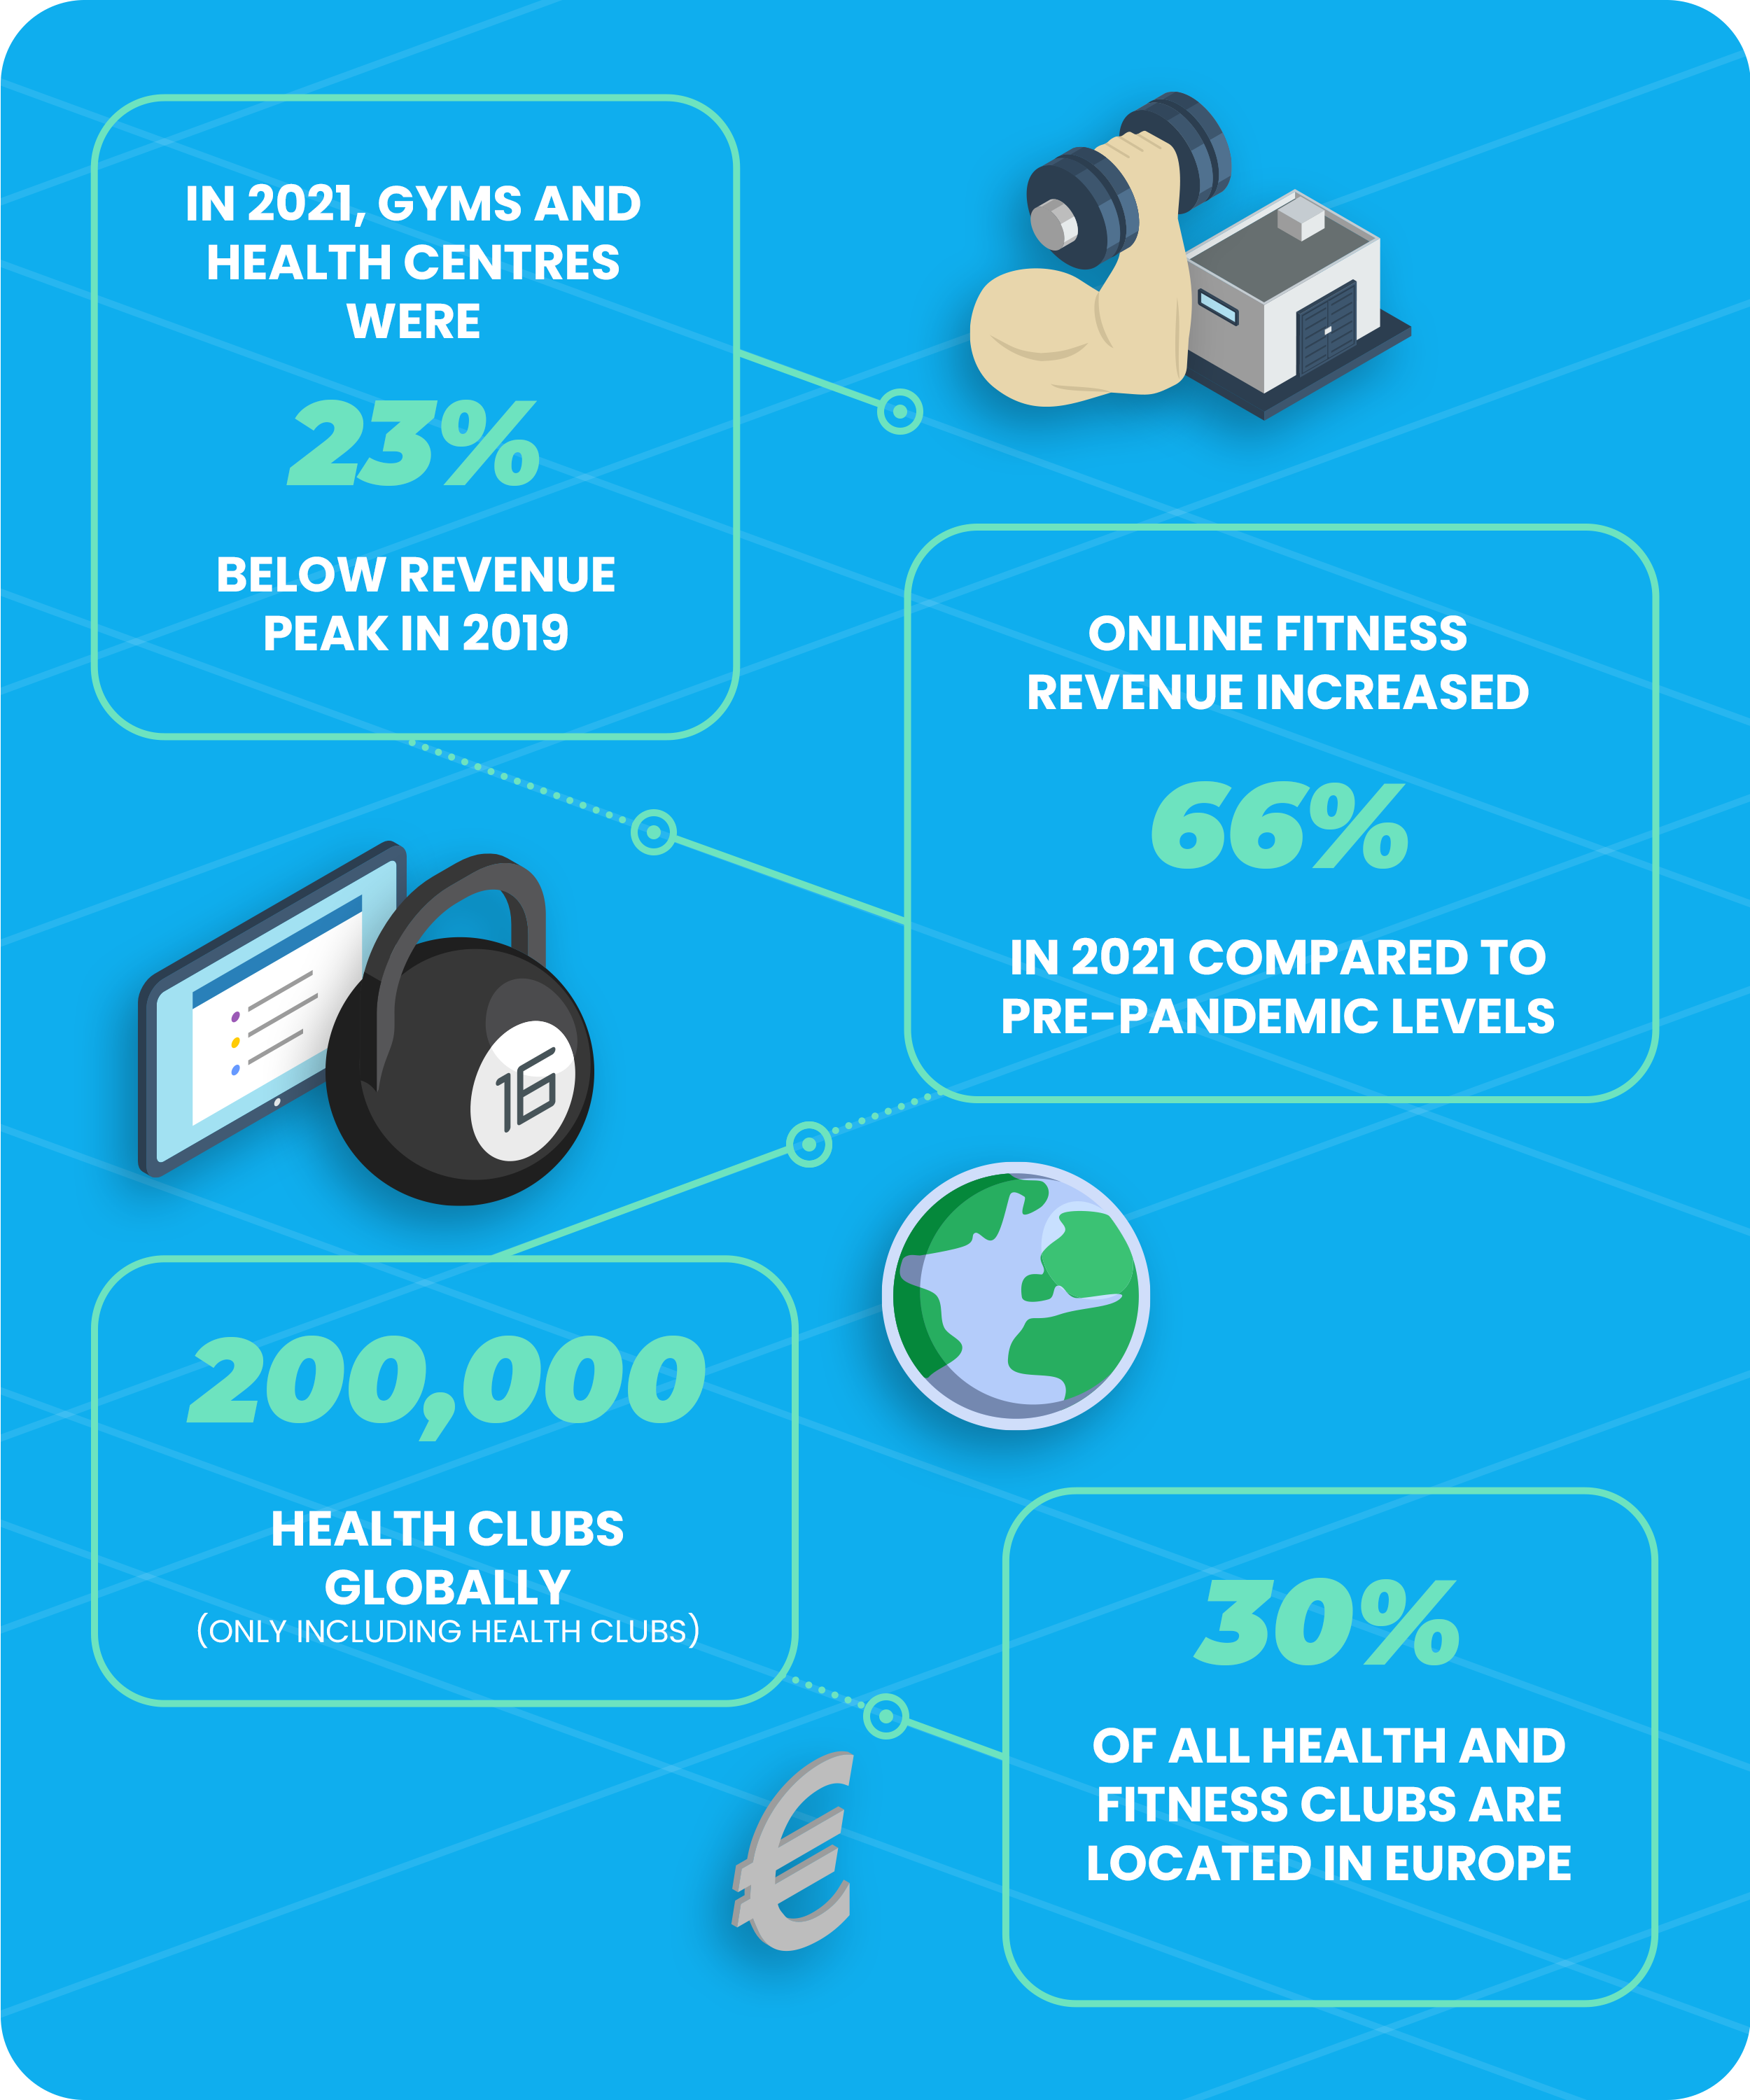 Fitness industry statistics - Number of gyms in the fitness industry